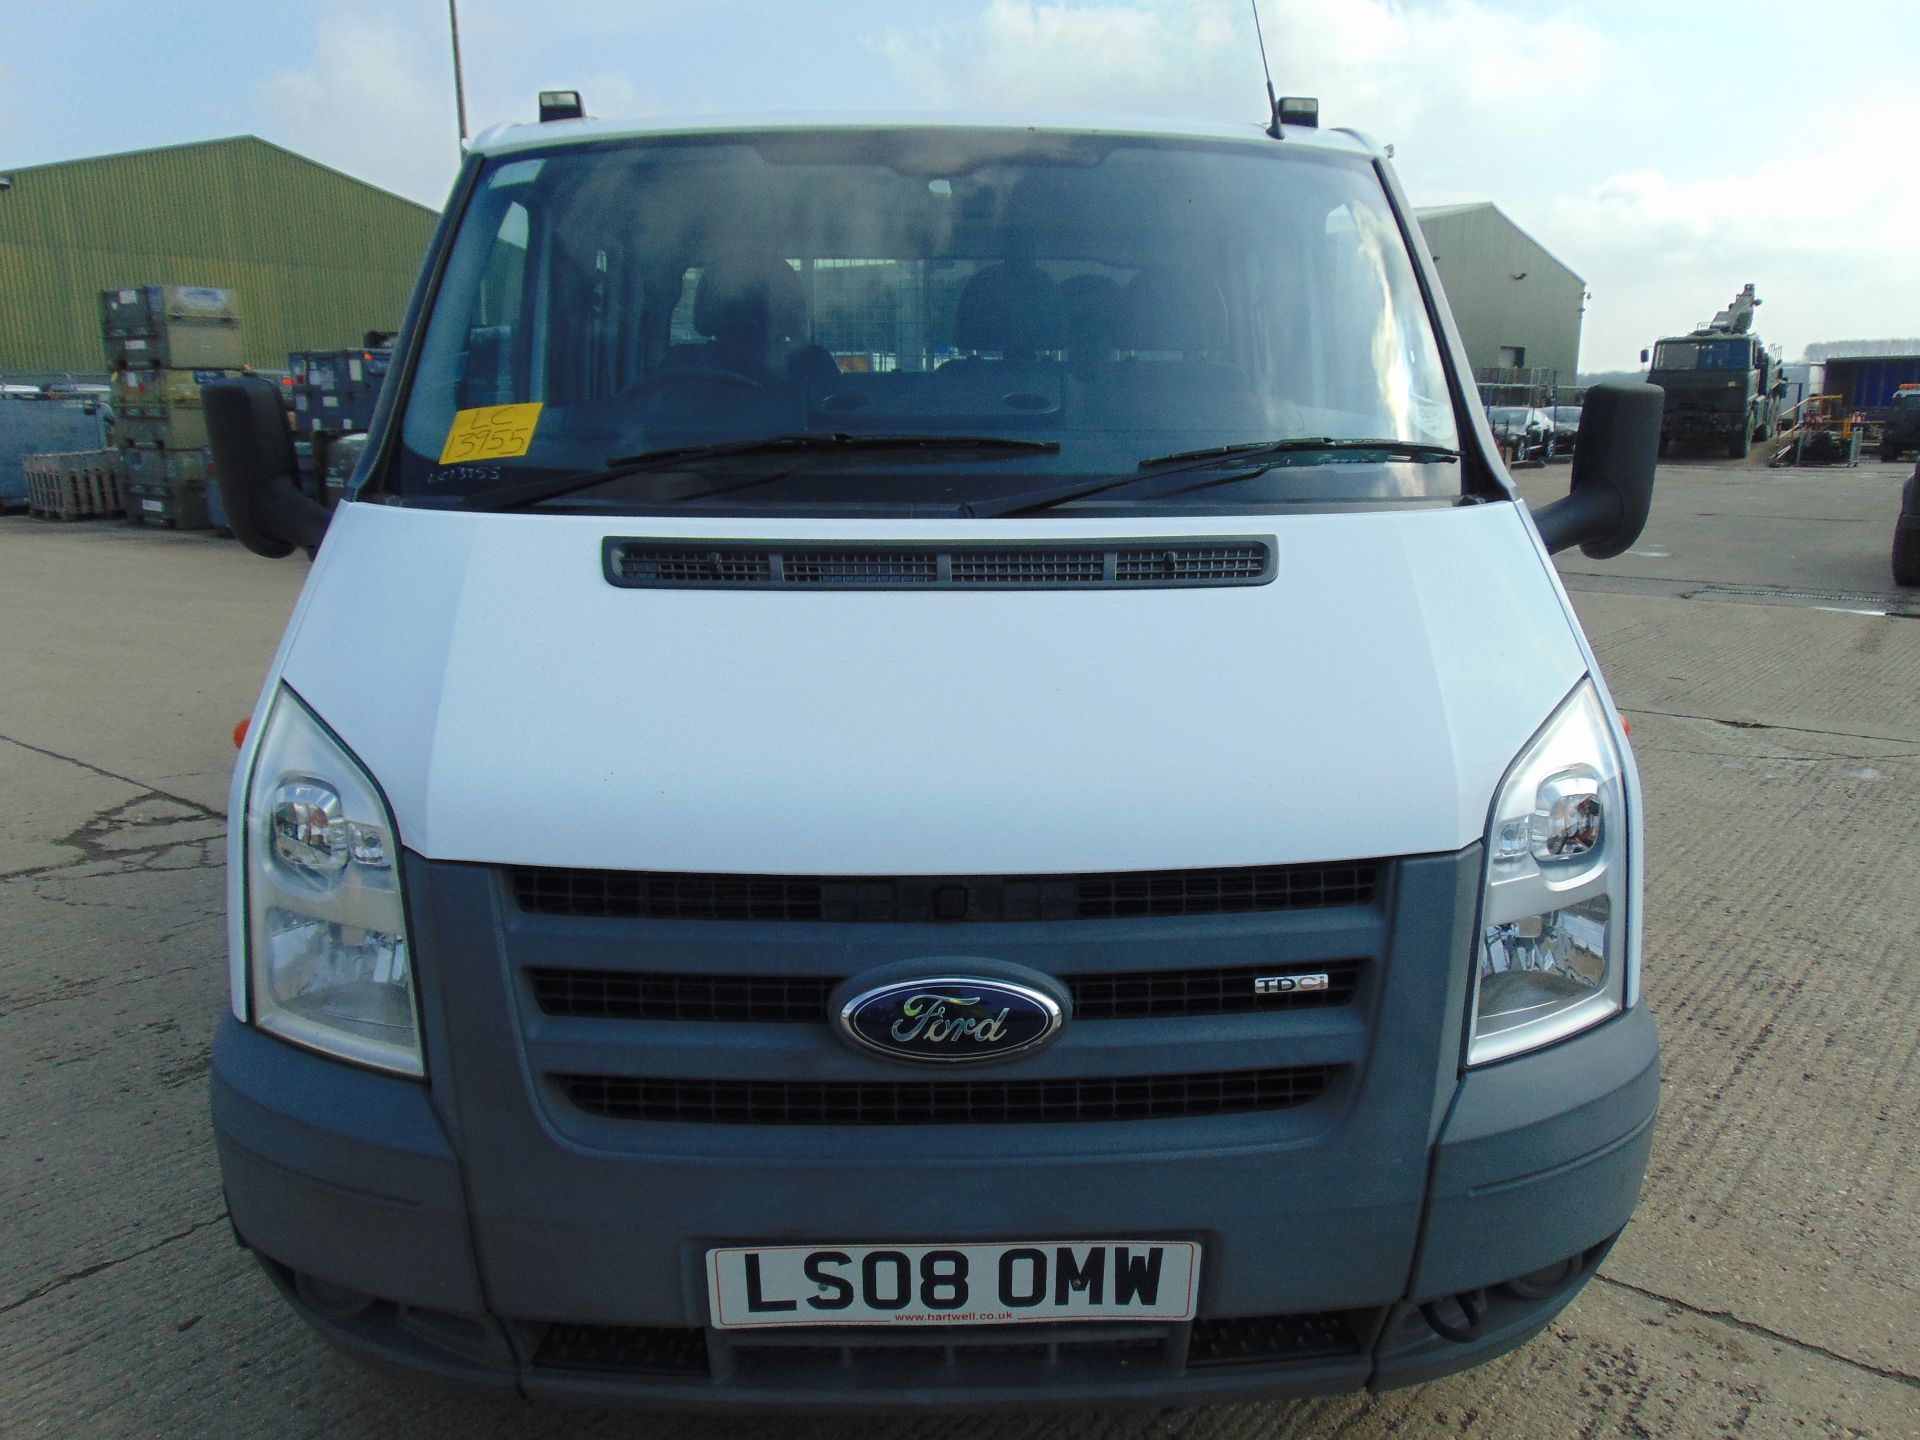 2008 Ford Transit 115 T350 Crew Cab Flat Bed Tipper - Image 2 of 16